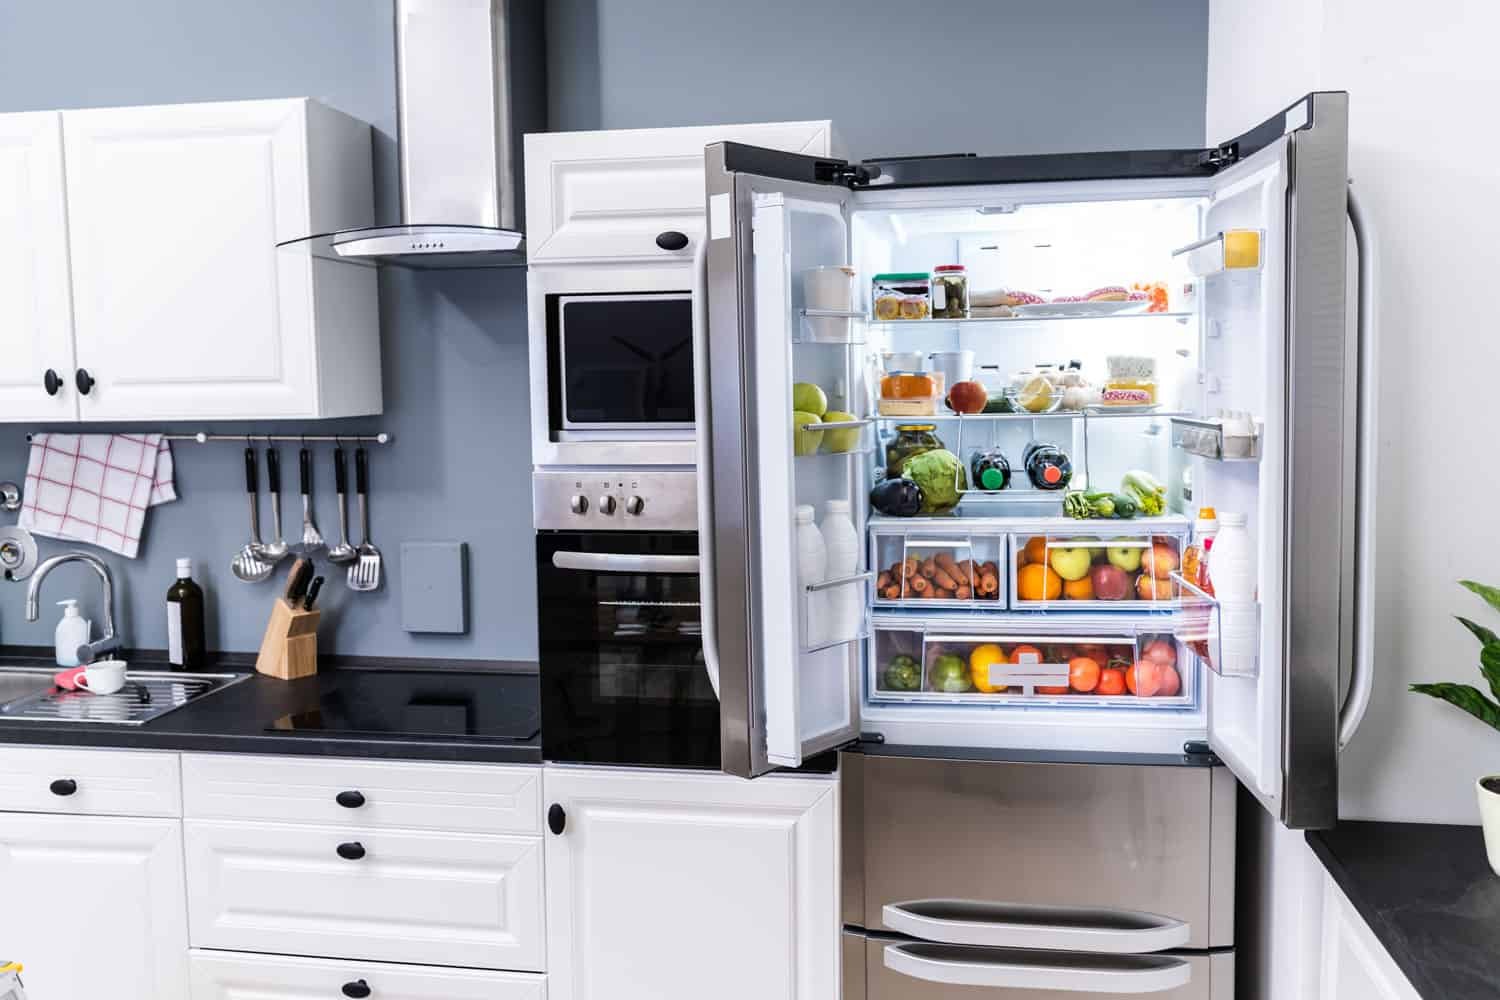 Tips to place the refrigerator to save kitchen space